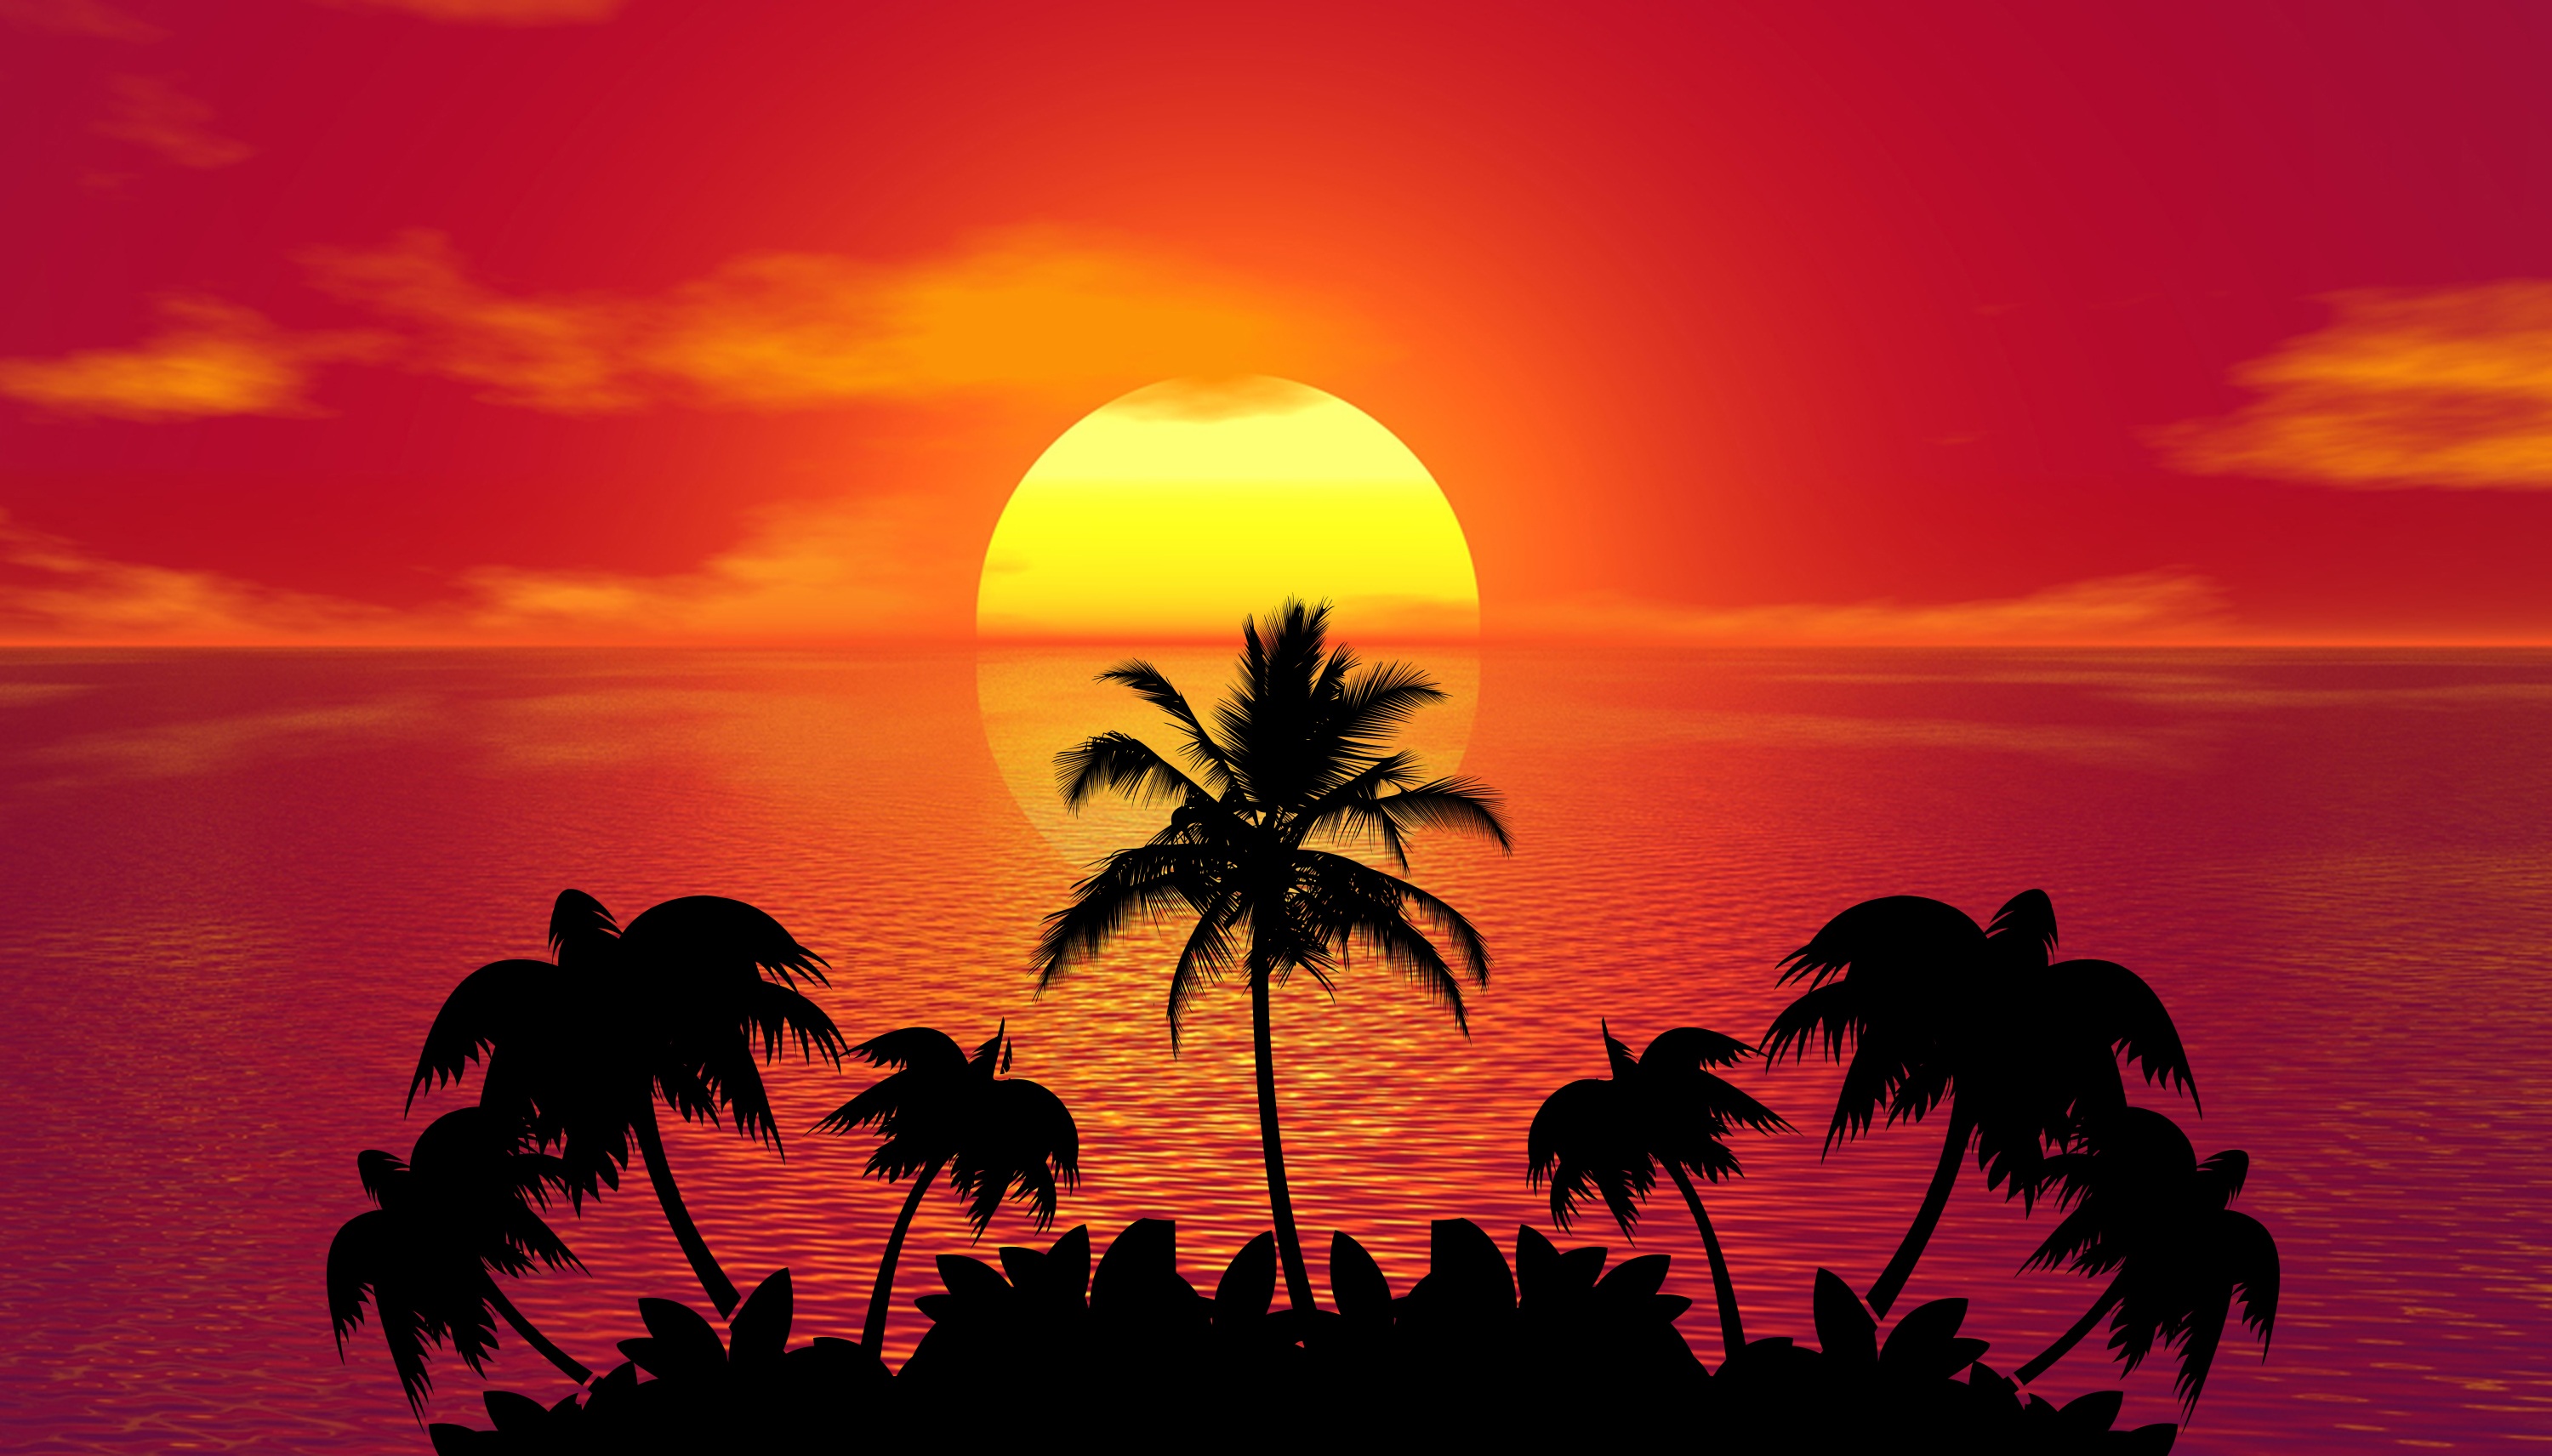  tropical summer sunset by pete on pixabay.com 